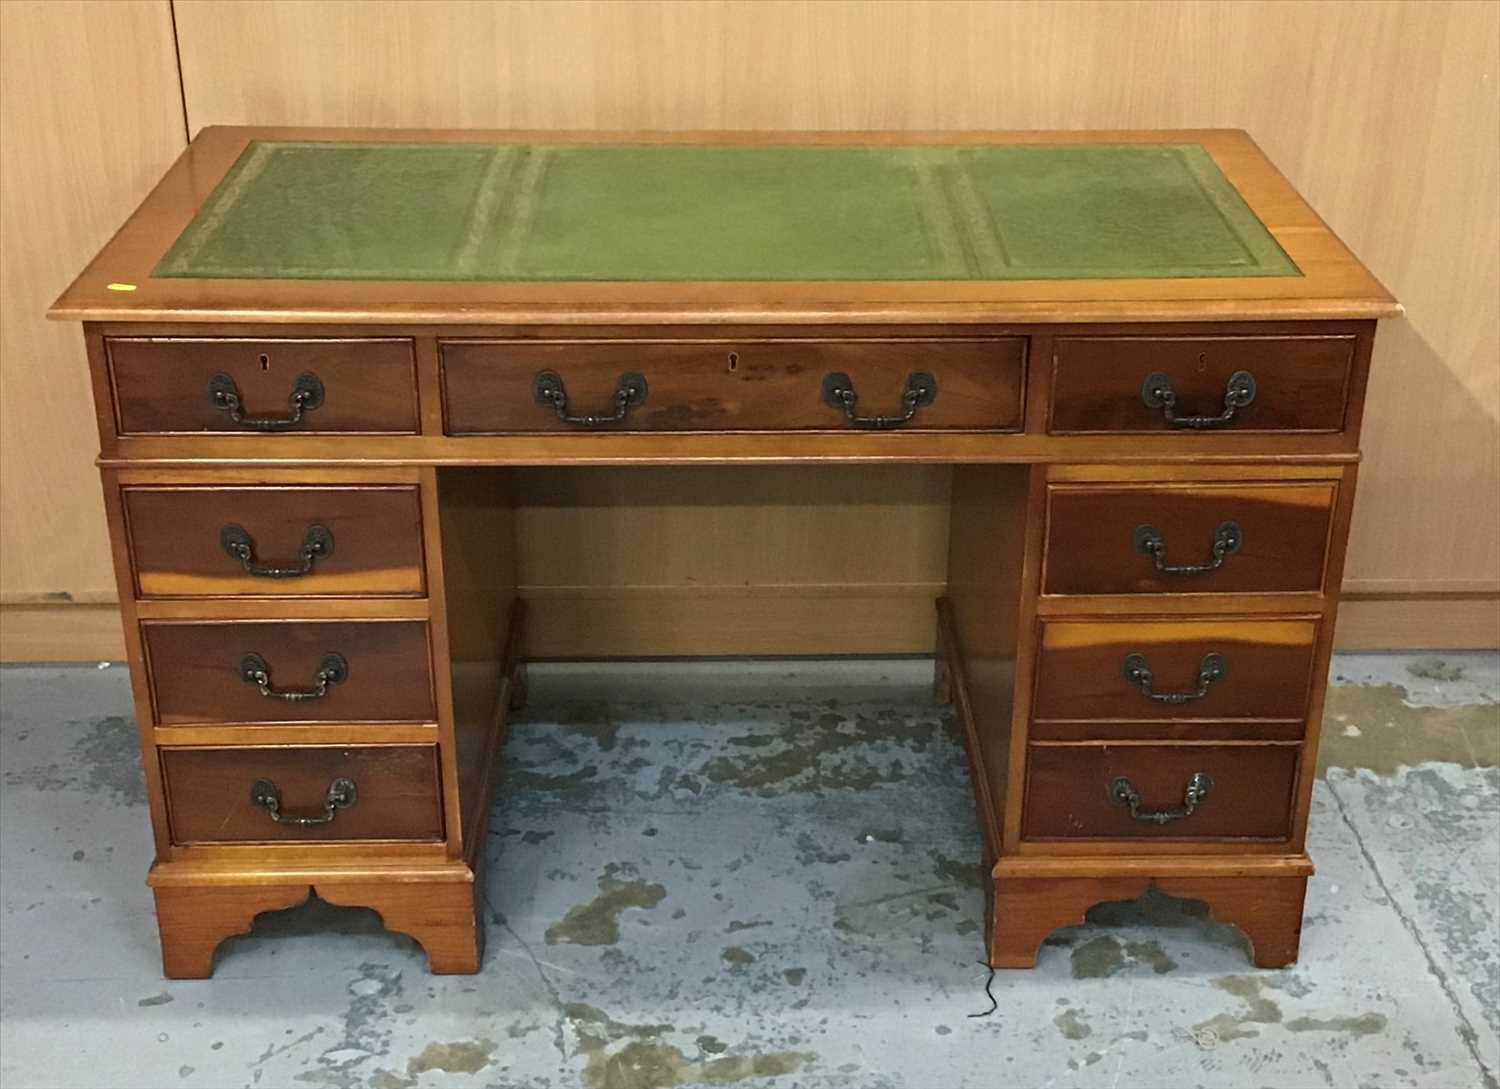 Lot 936 - Yew wood twin pedestal desk with tooled green leather top a arrangement of eight drawers below on bracket feet